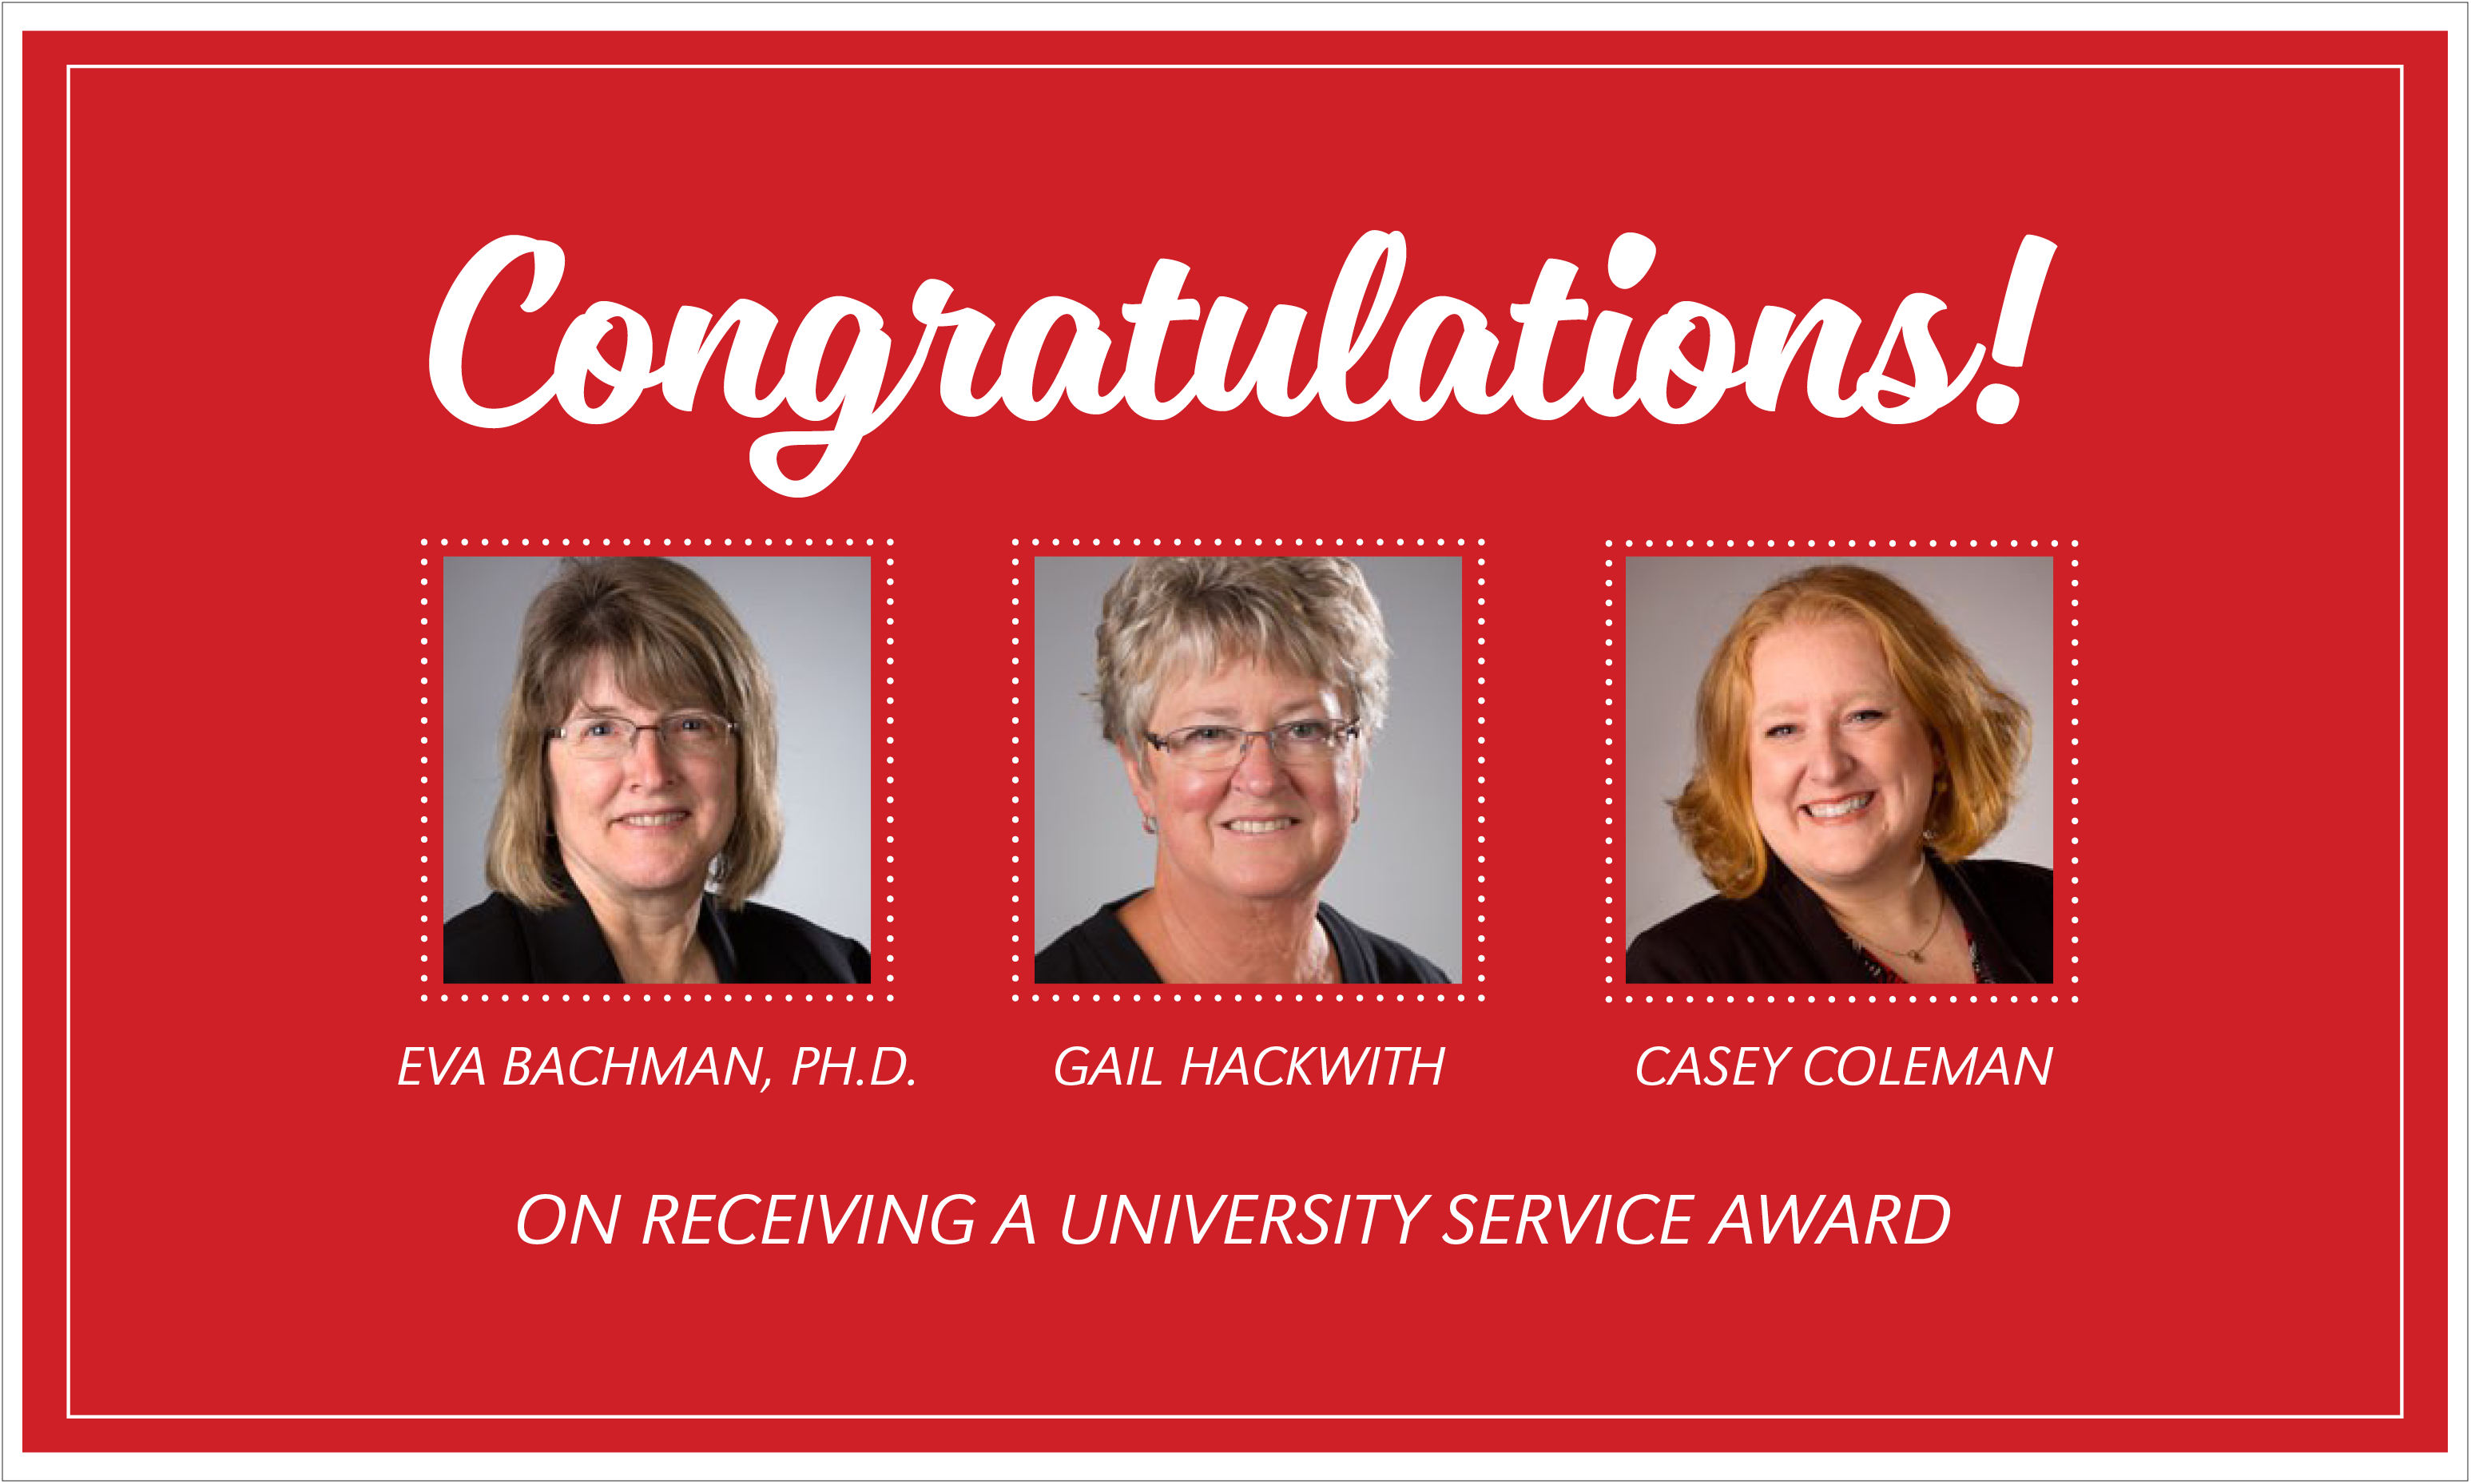 Dr. Eva Bachman, Gail Hackwith, and Casey Coleman from the Office of Graduate Studies received University Service Awards on September 25, 2018.